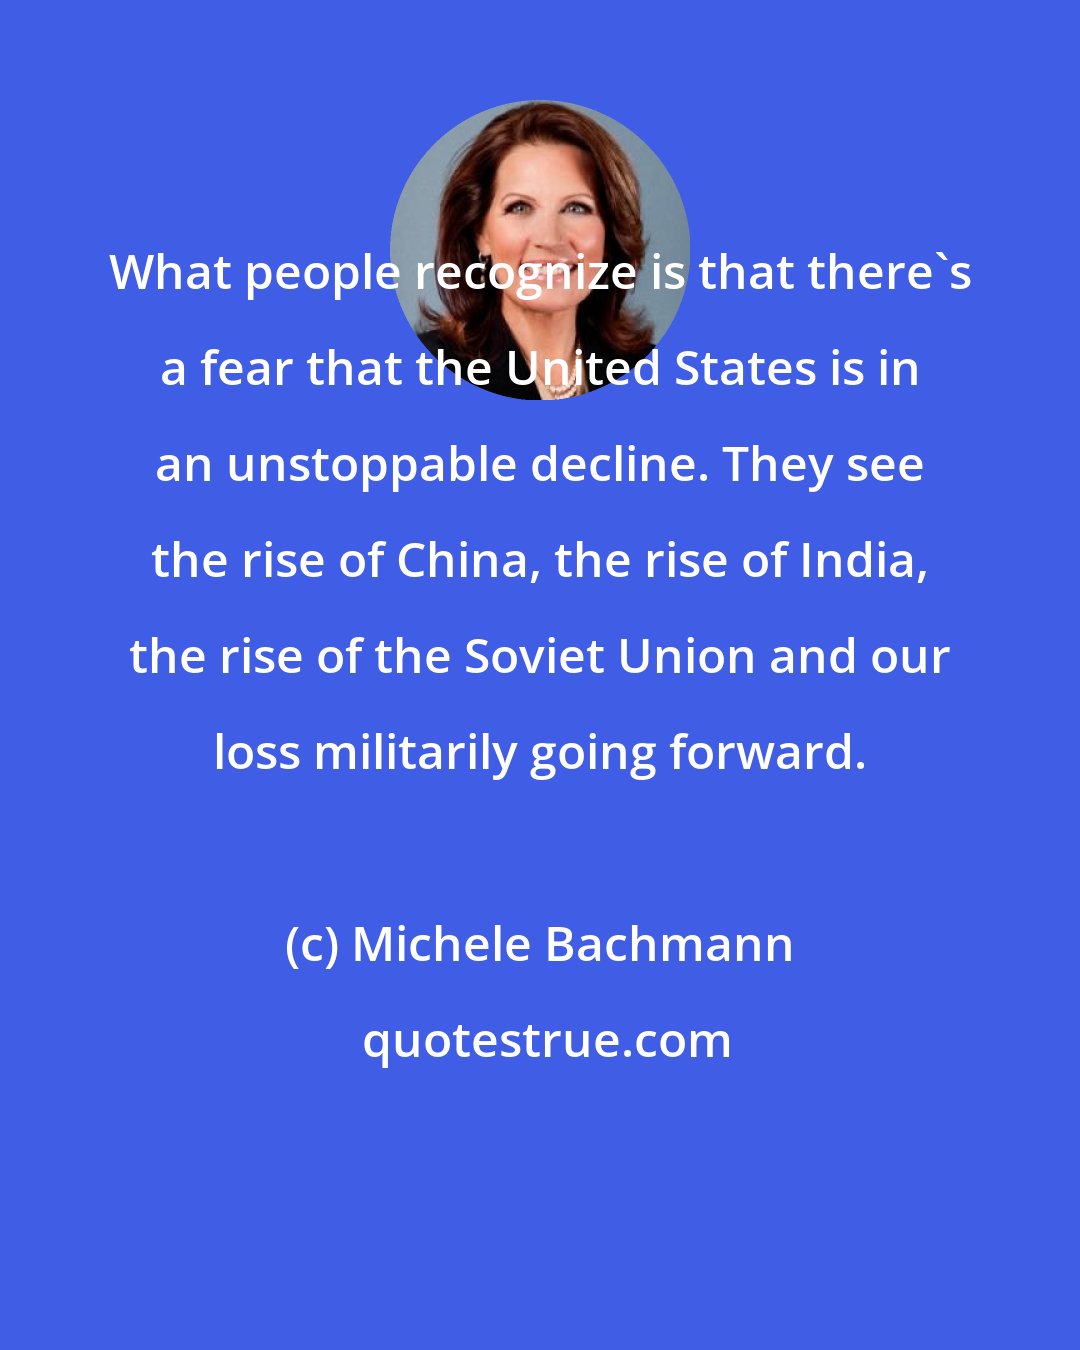 Michele Bachmann: What people recognize is that there's a fear that the United States is in an unstoppable decline. They see the rise of China, the rise of India, the rise of the Soviet Union and our loss militarily going forward.